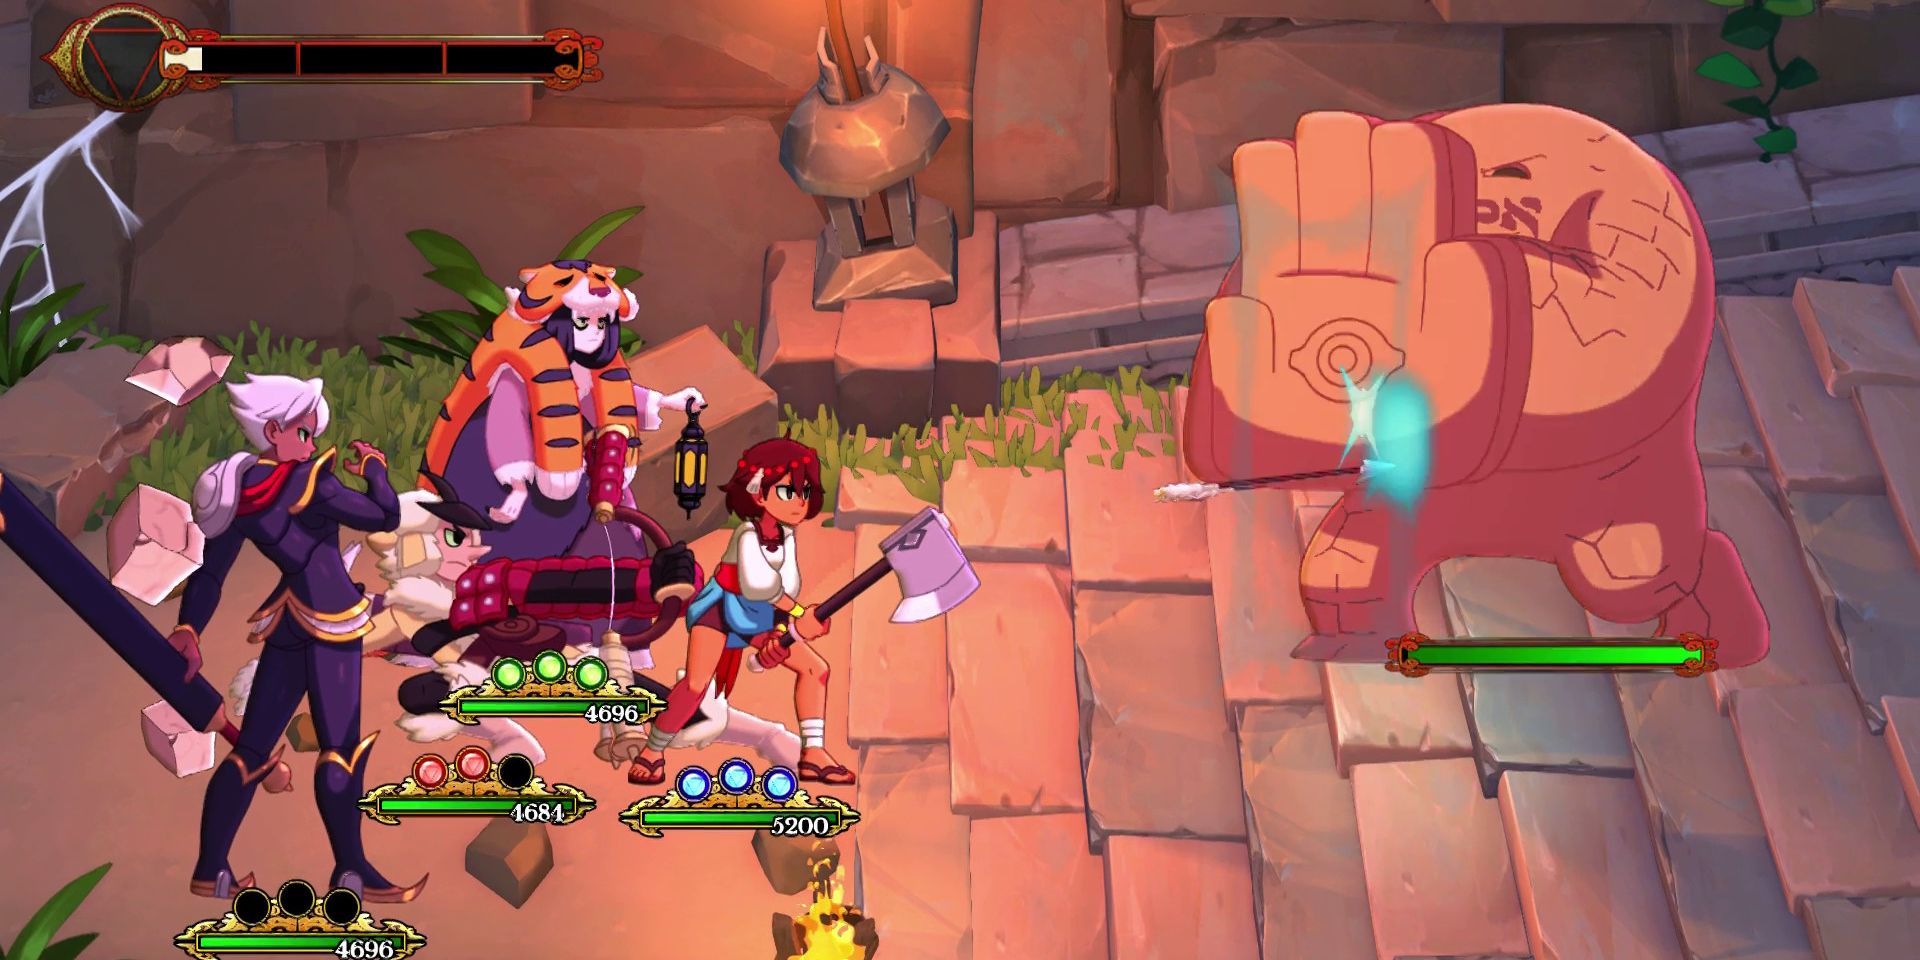 Dhar, Zebei, Razmi, and Ajna fight a Golem in Indivisible game